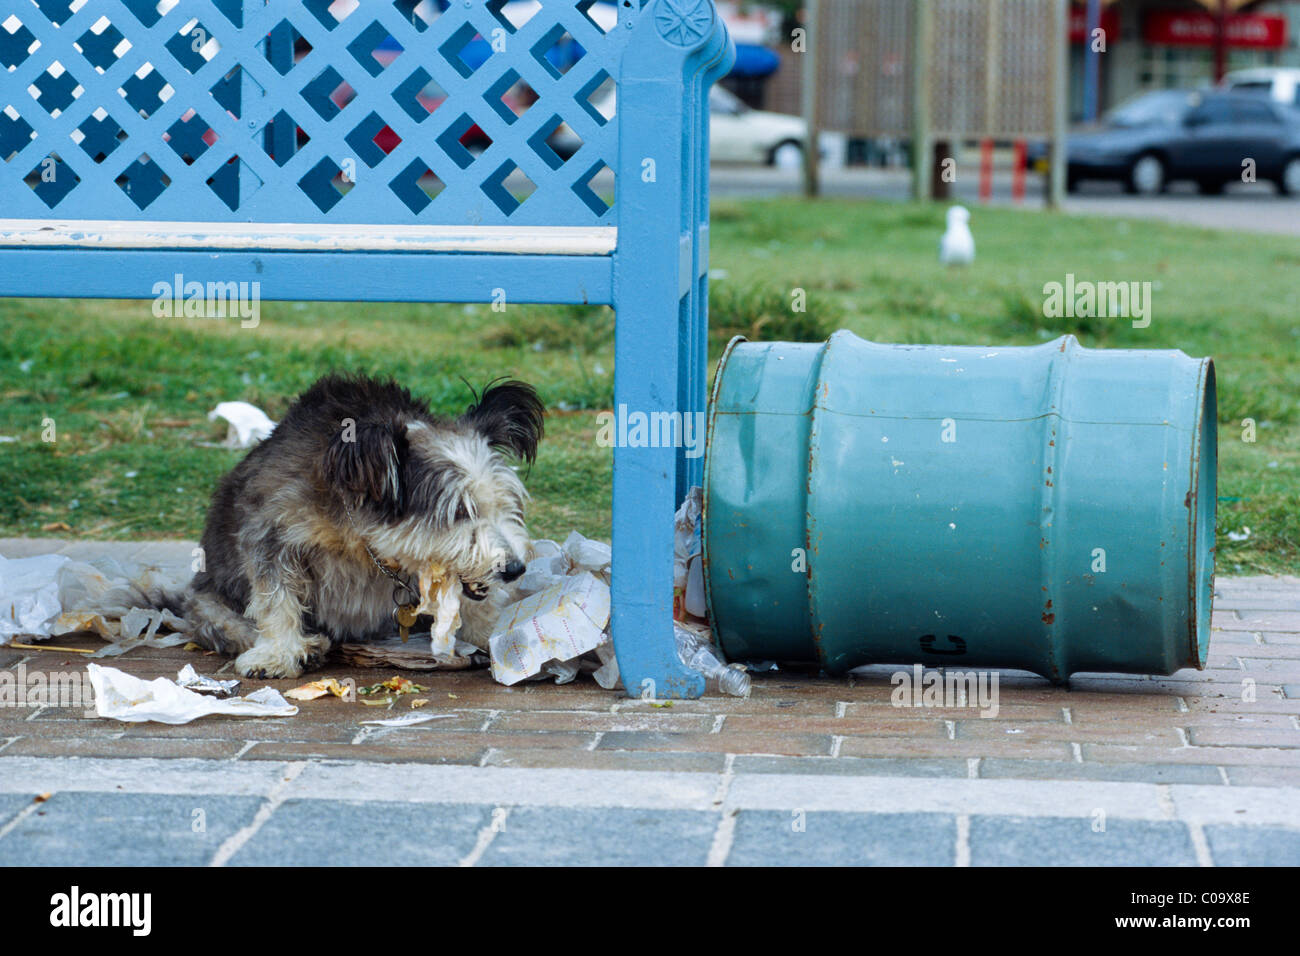 Dog eating leftover food from a garbage, Sydney, New South Wales, Australia Stock Photo